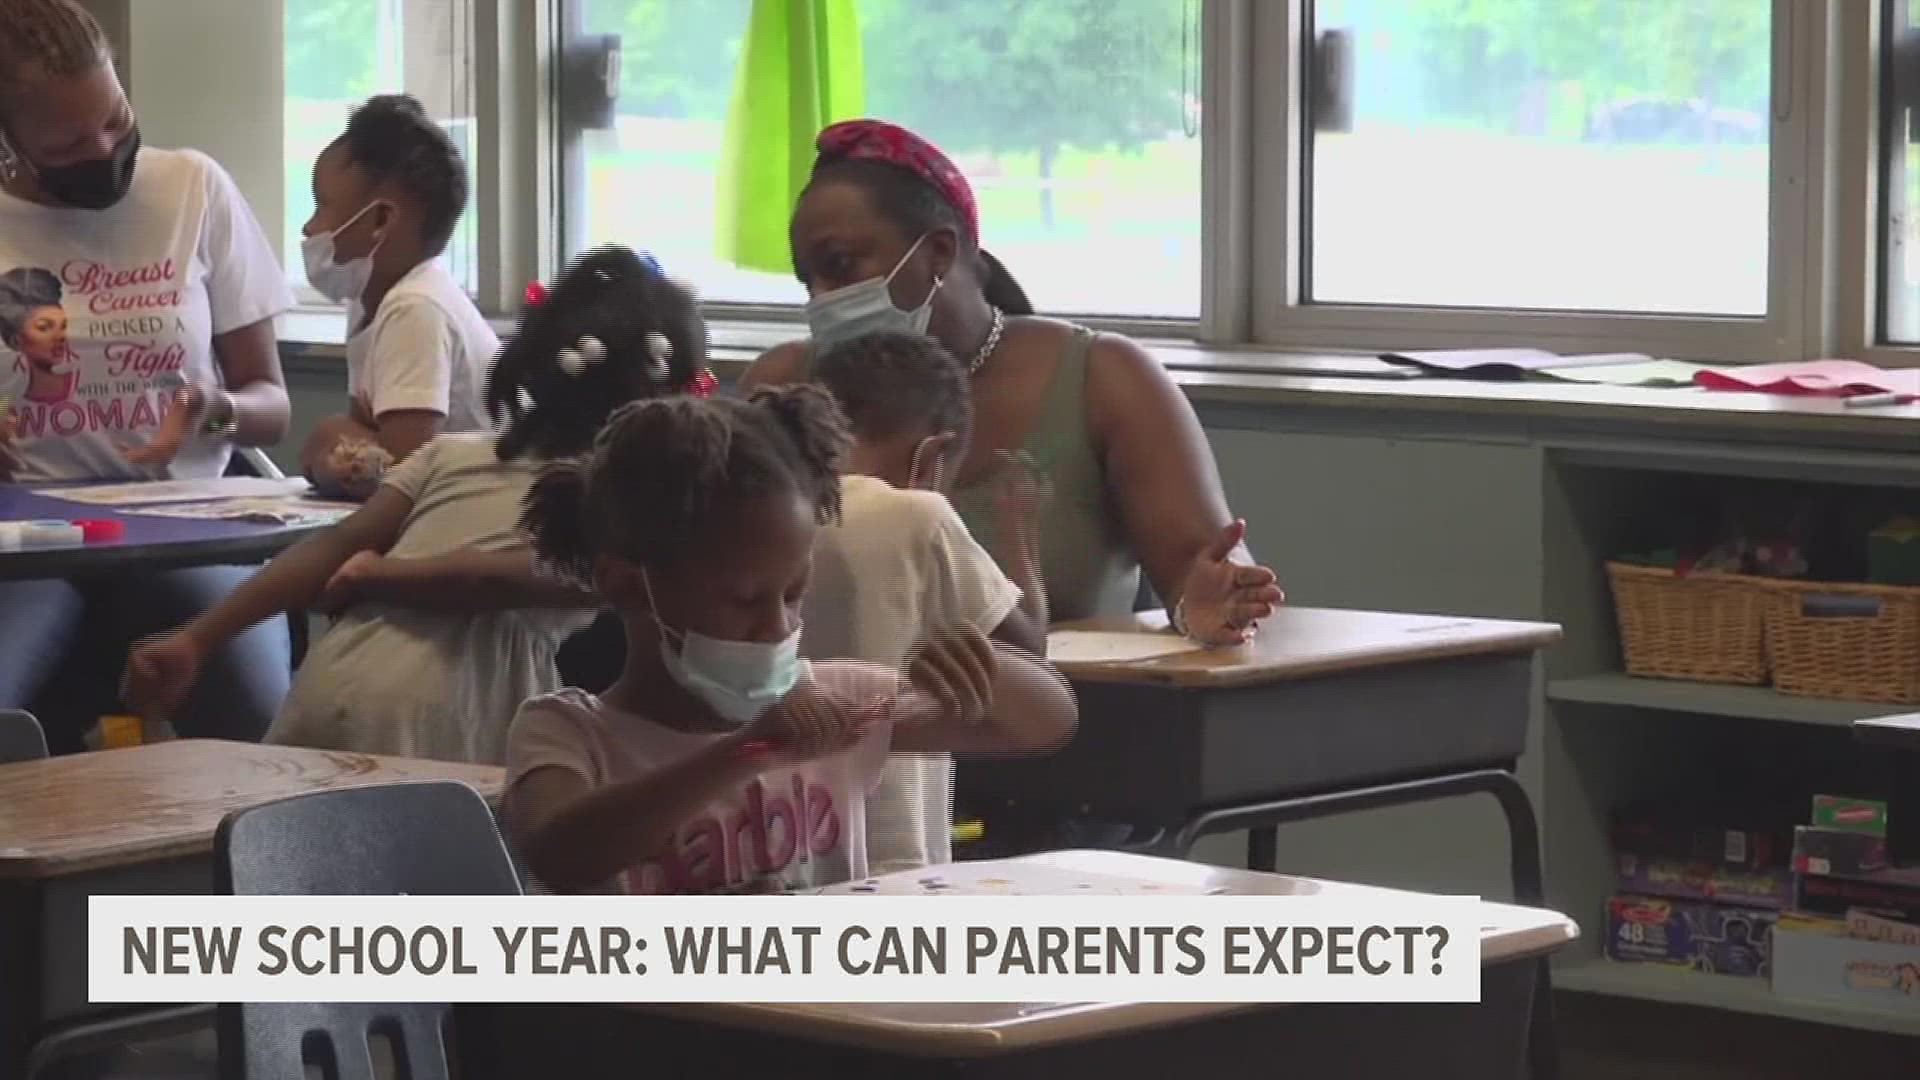 School officials say parents and students will be able to experience a better school year than seen in years past.